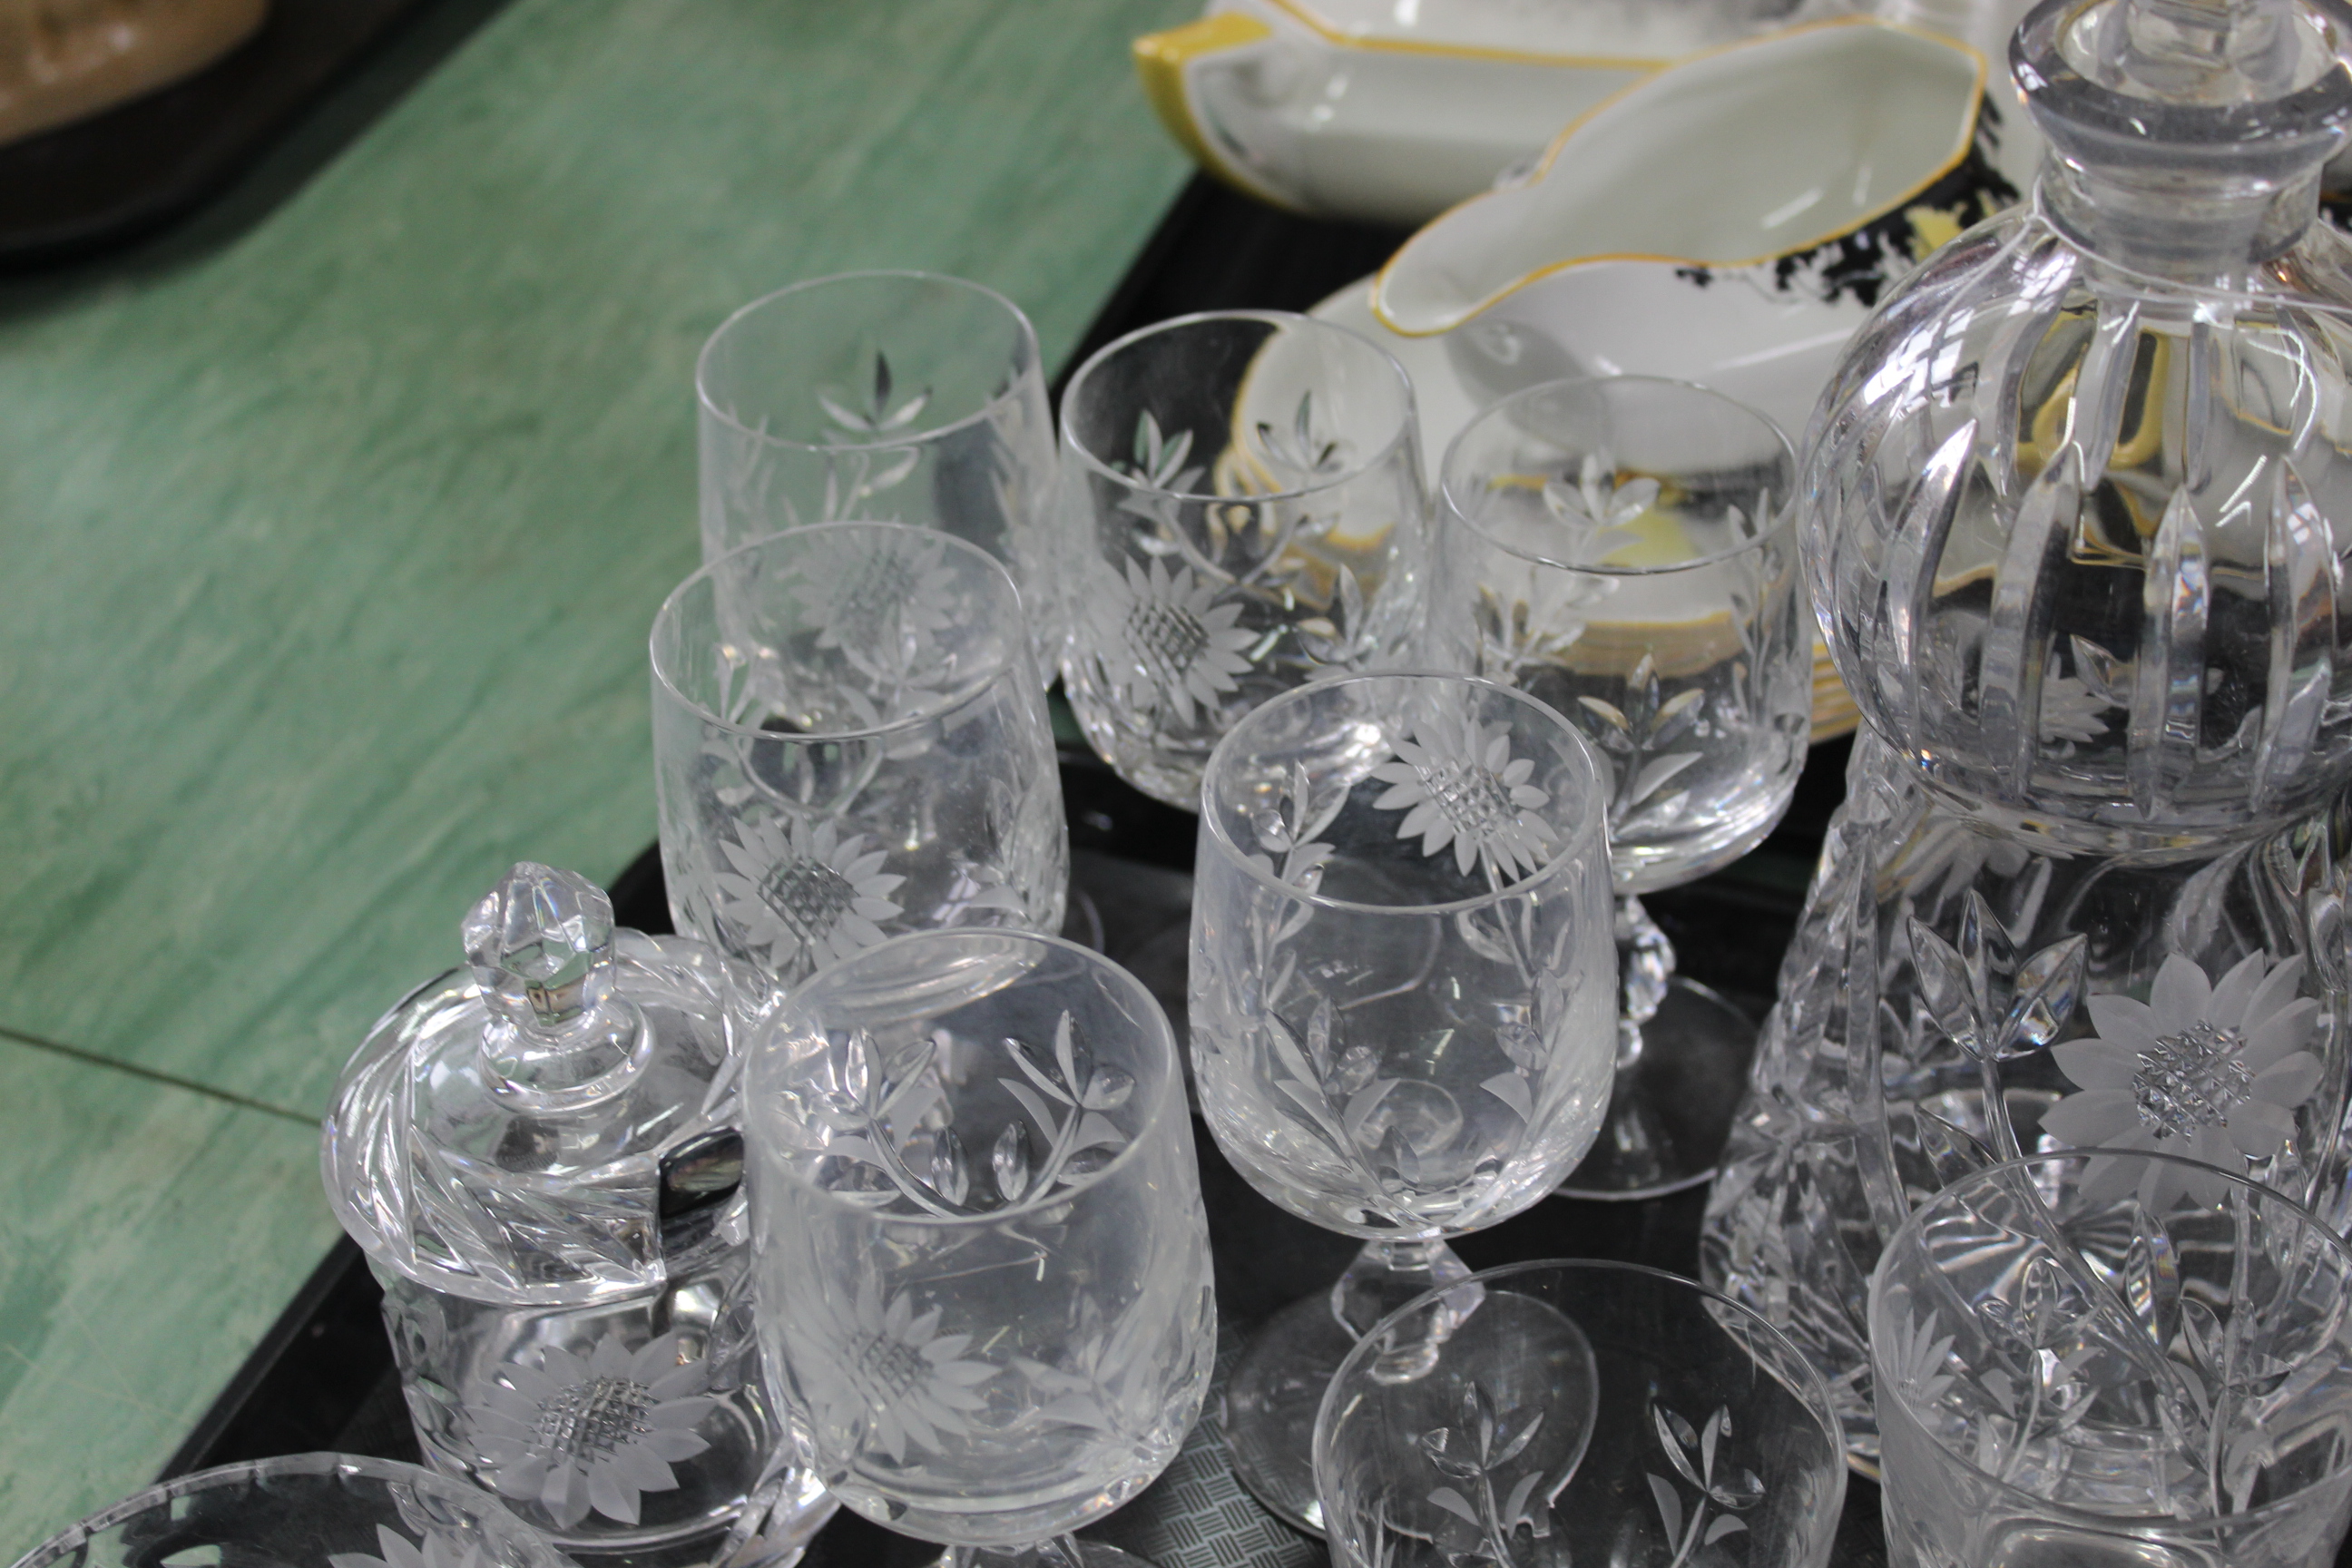 A set of sunflower design glassware including six sherry glasses, decanter, - Image 2 of 3